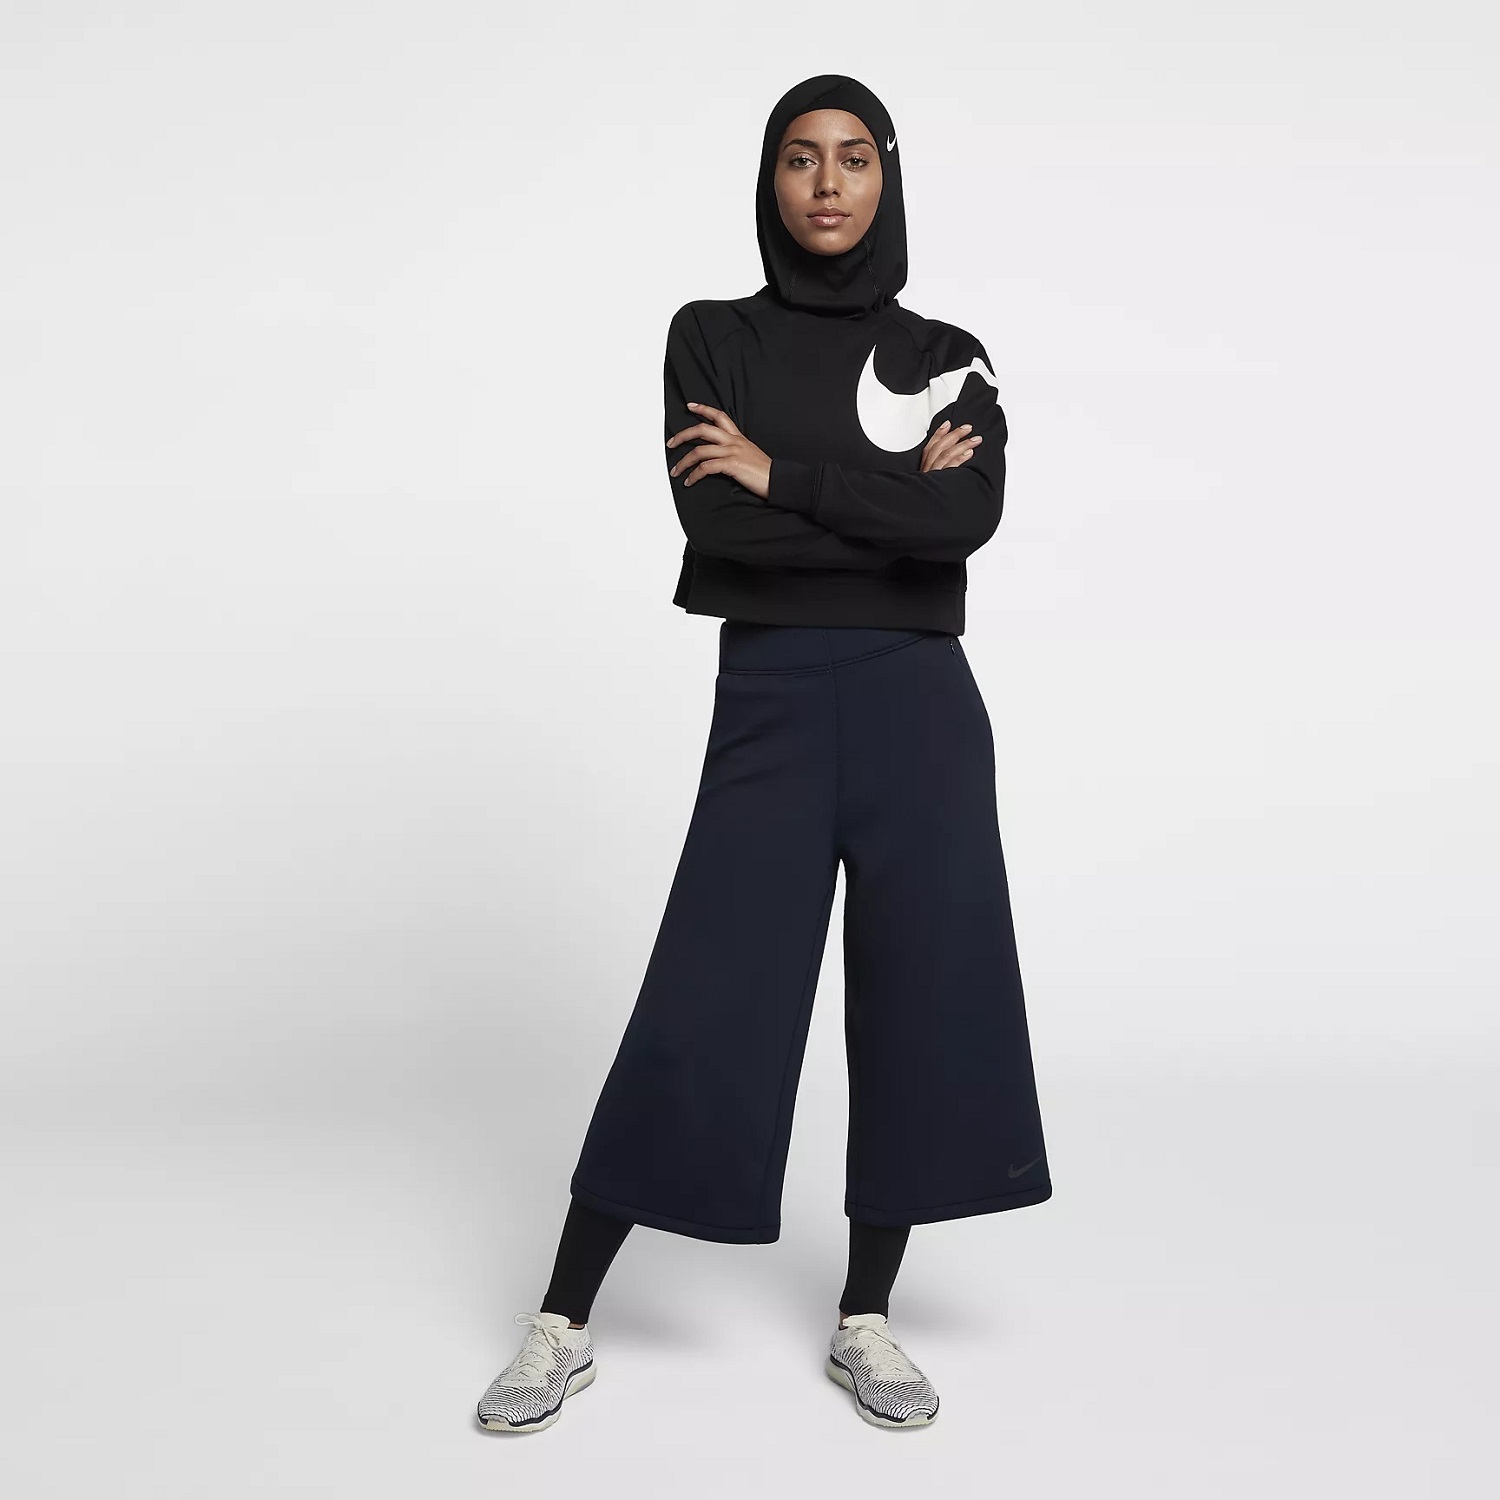 Nike Pro Hijab Now Available For Pre-Order